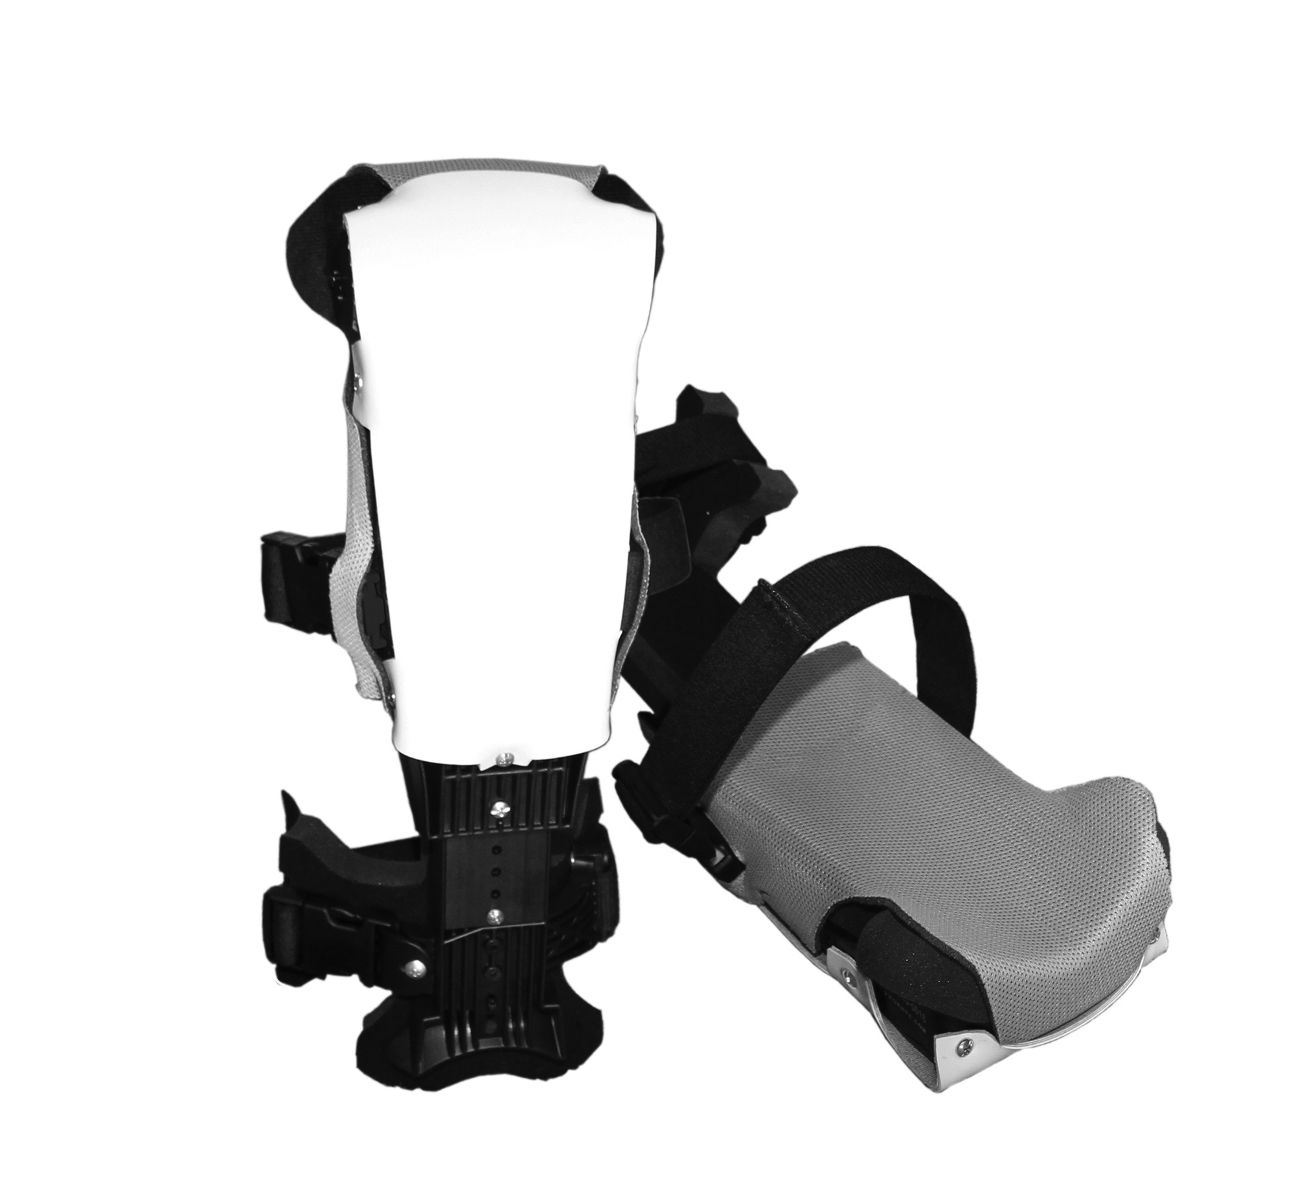 ProKnee introduces two new kneepad models